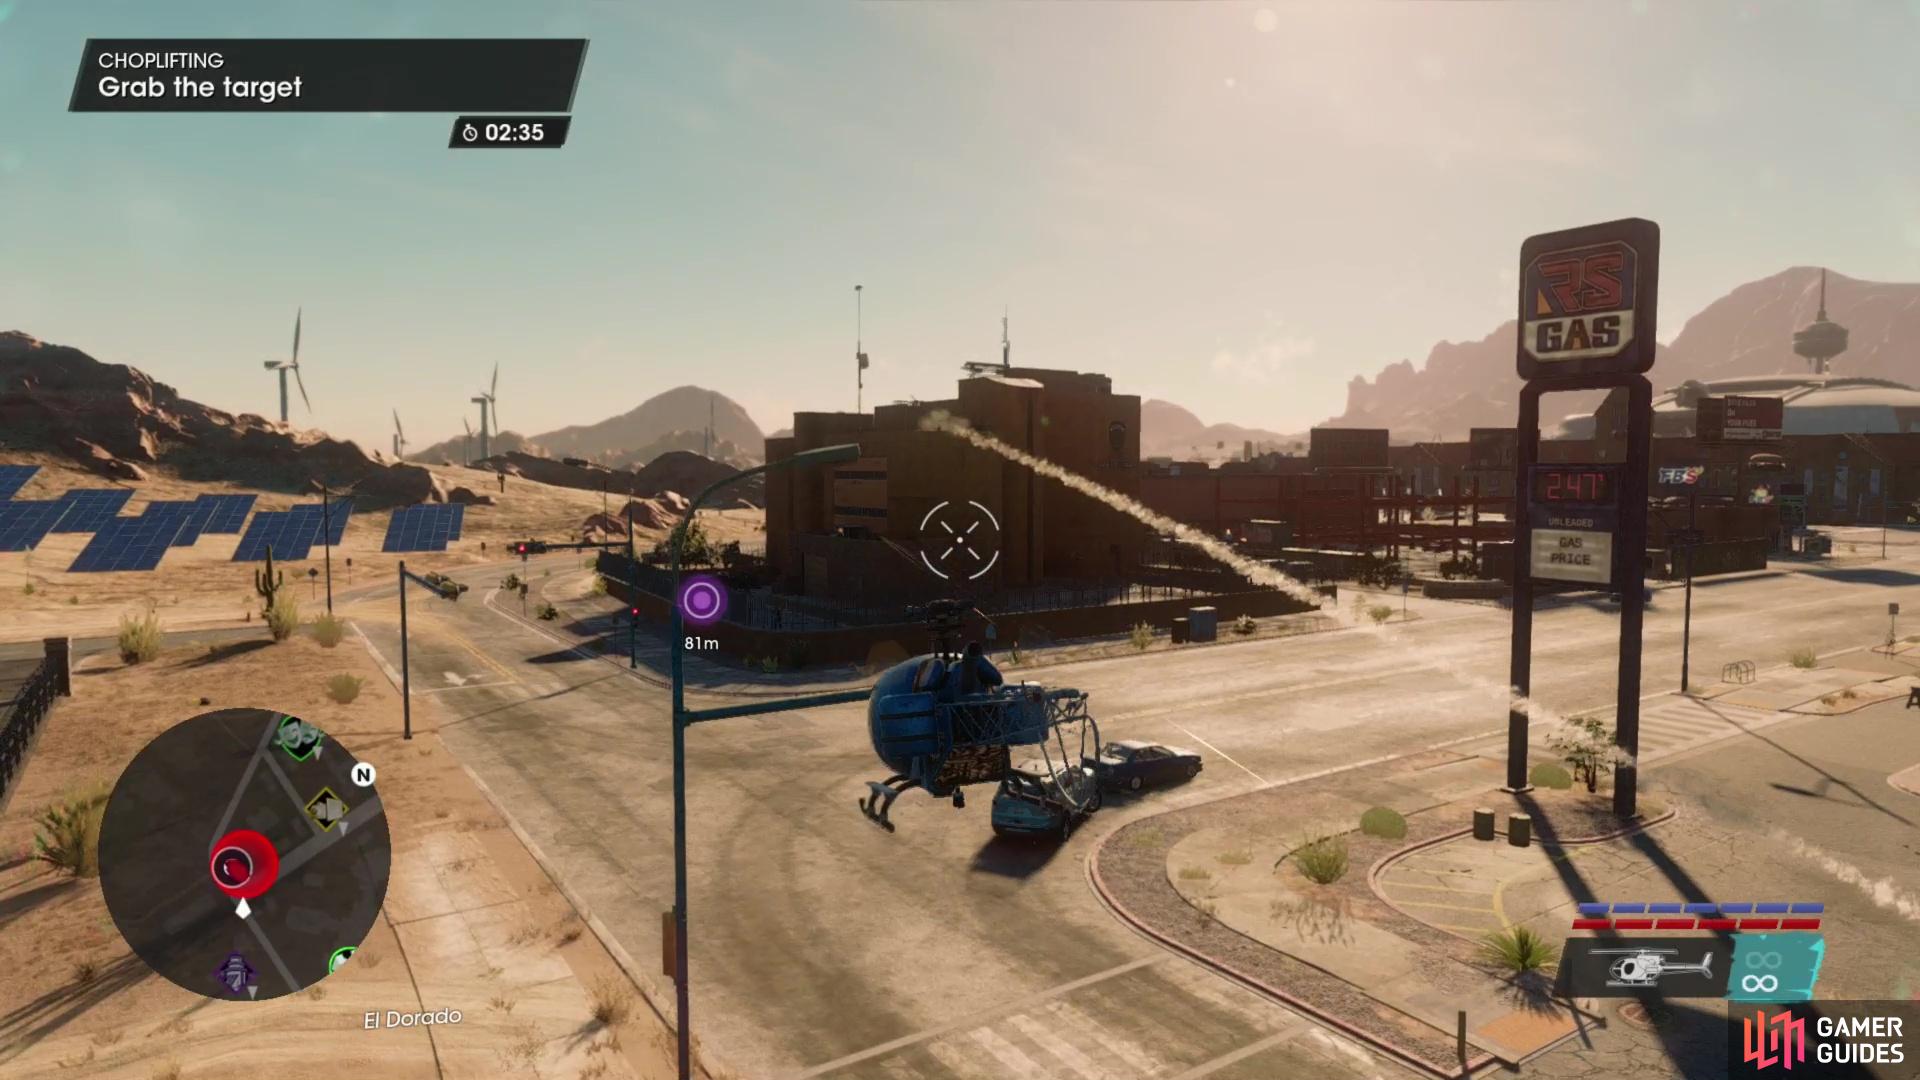 RPG-armed enemies guard the payload, and hostile helicopters may spawn if you fly too high.